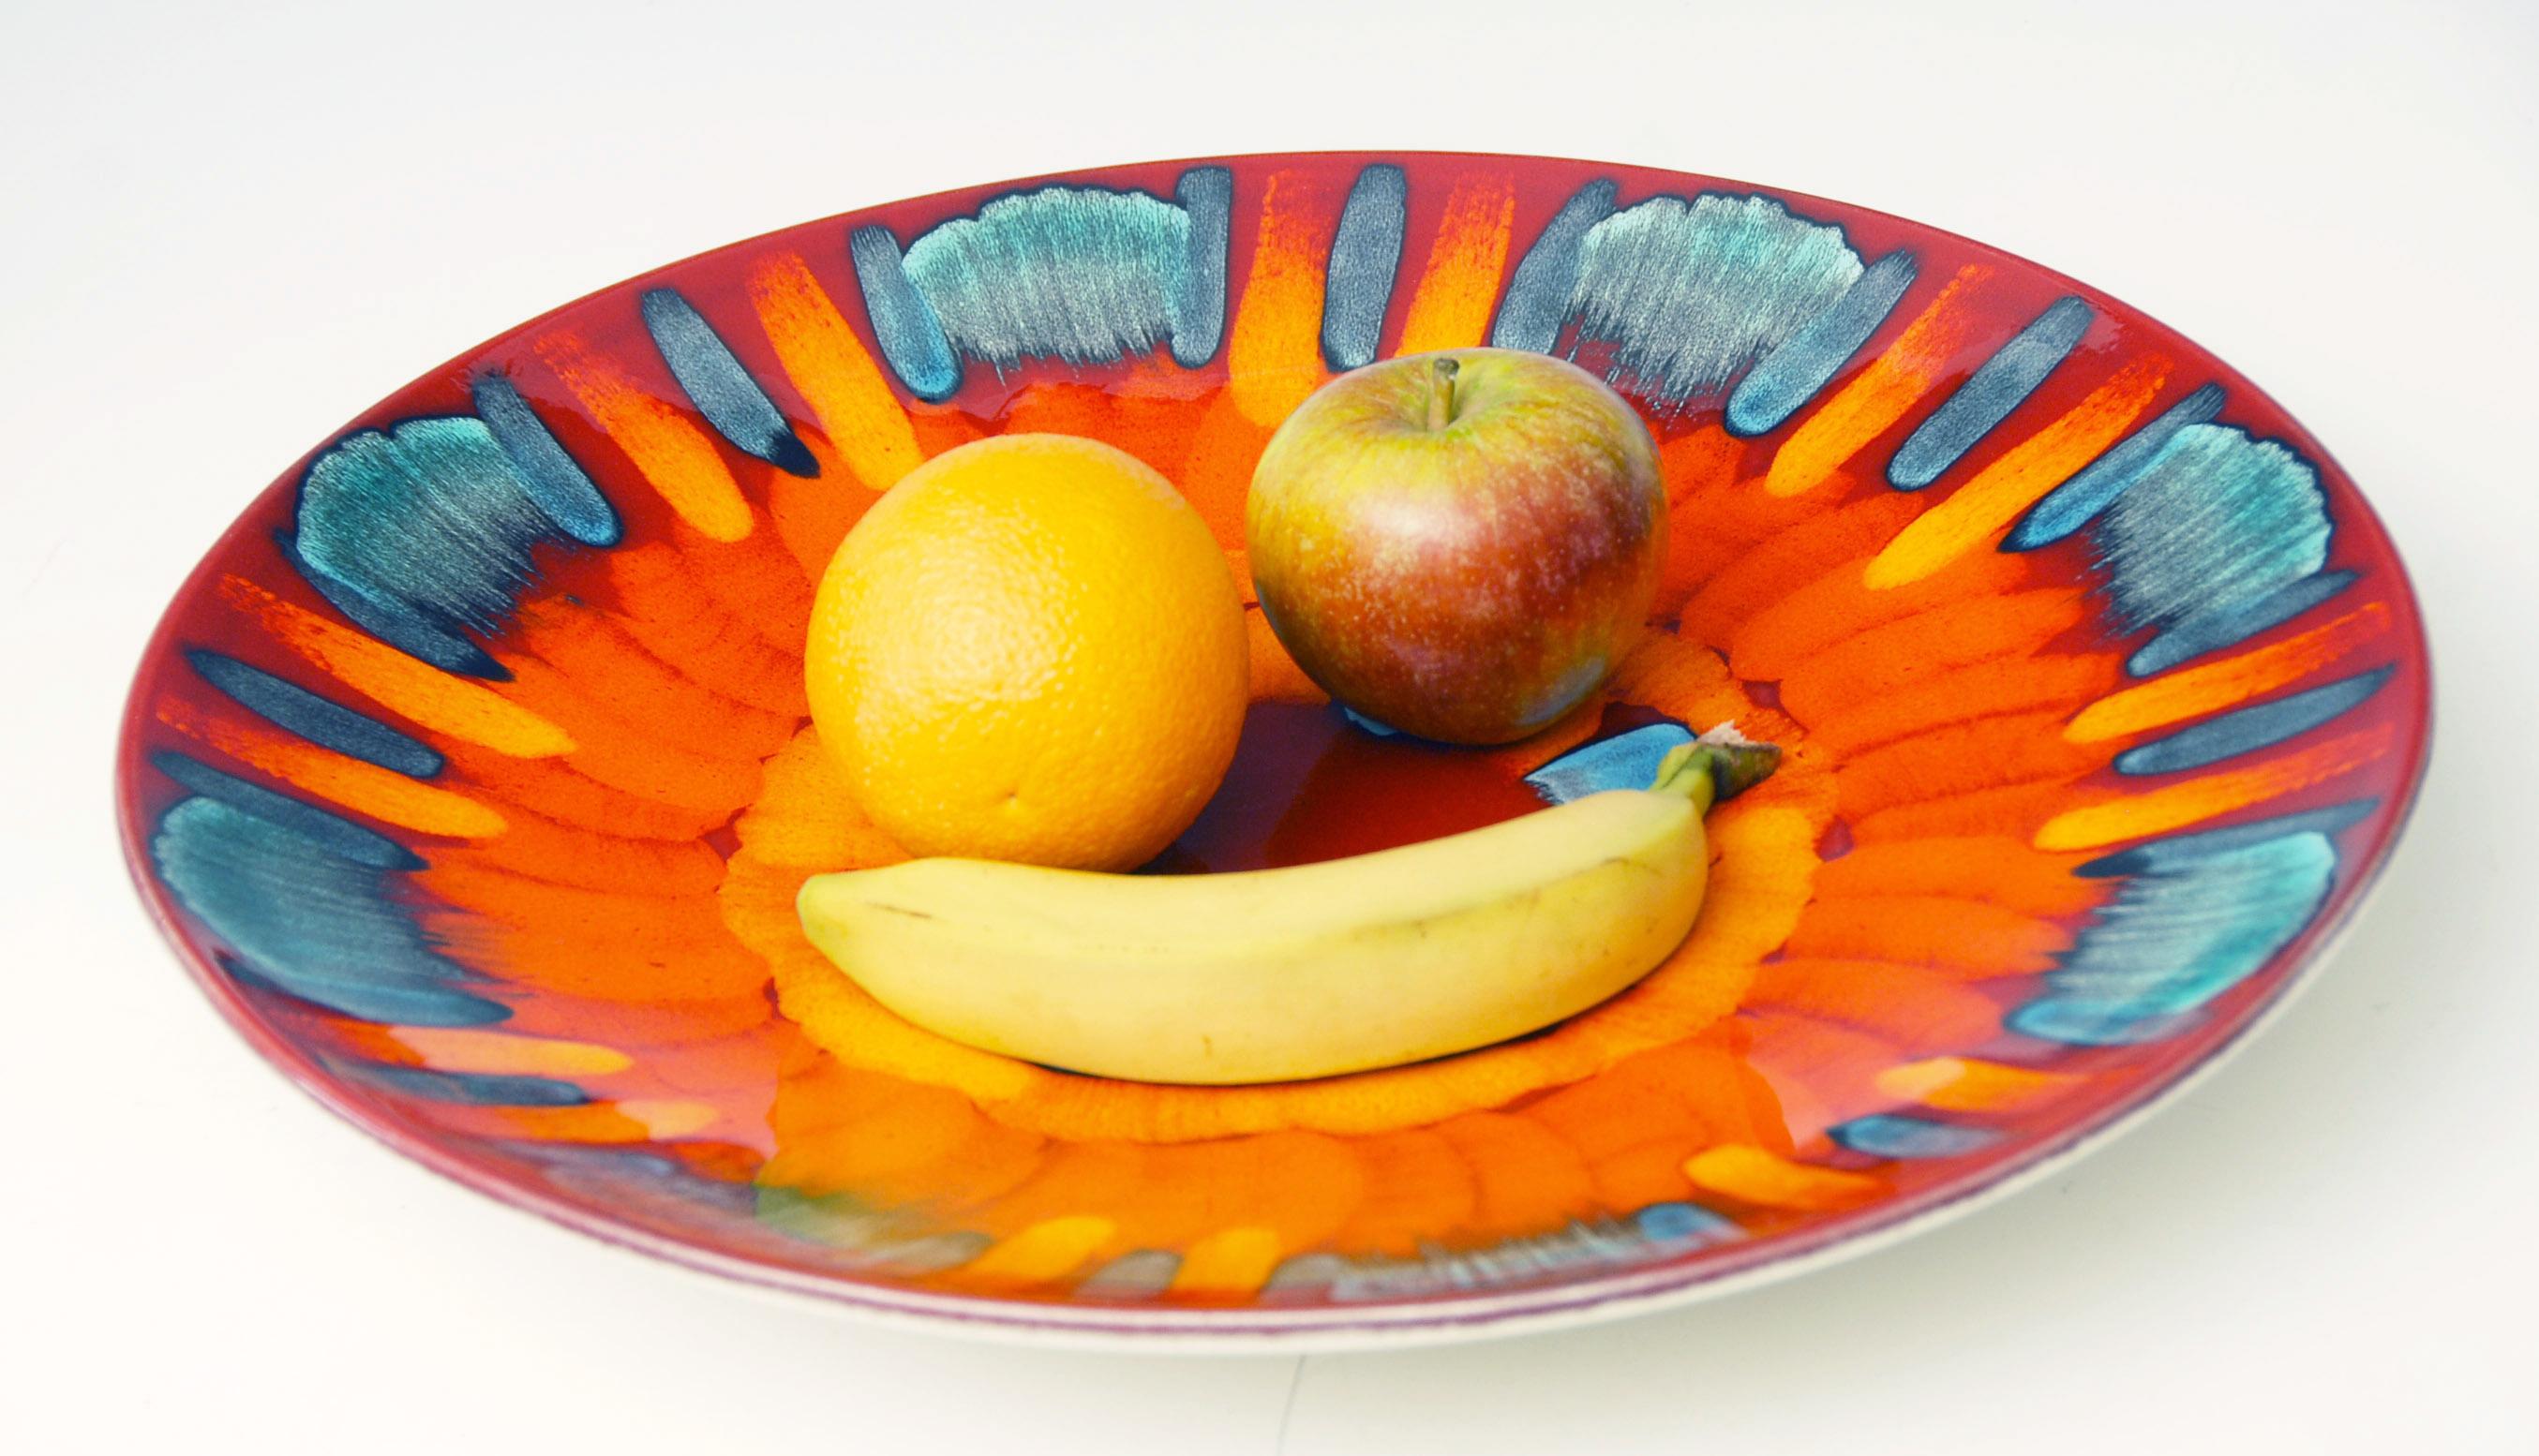 Huge vibrant Poole Pottery bowl, could be a table centrepiece or fruit bowl, or could be hung on a wall using the two small drilled holes on back.

16 inches wide, price includes free shipping.
 